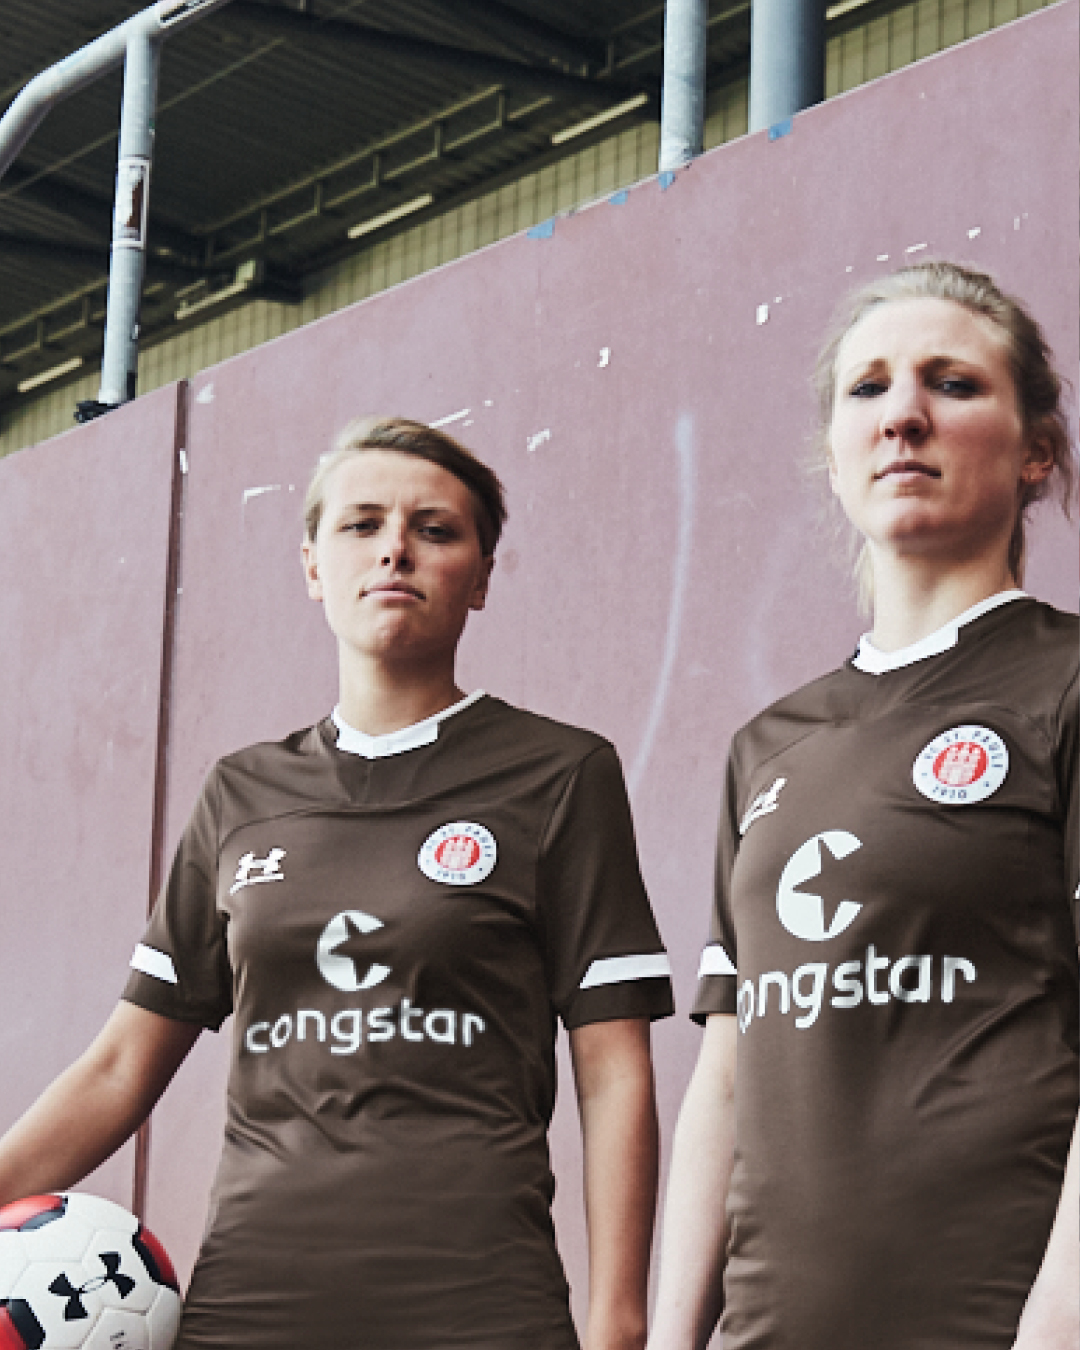 Ann-Sophie Greifenberg and Lena Kattenbeck in the new home shirt